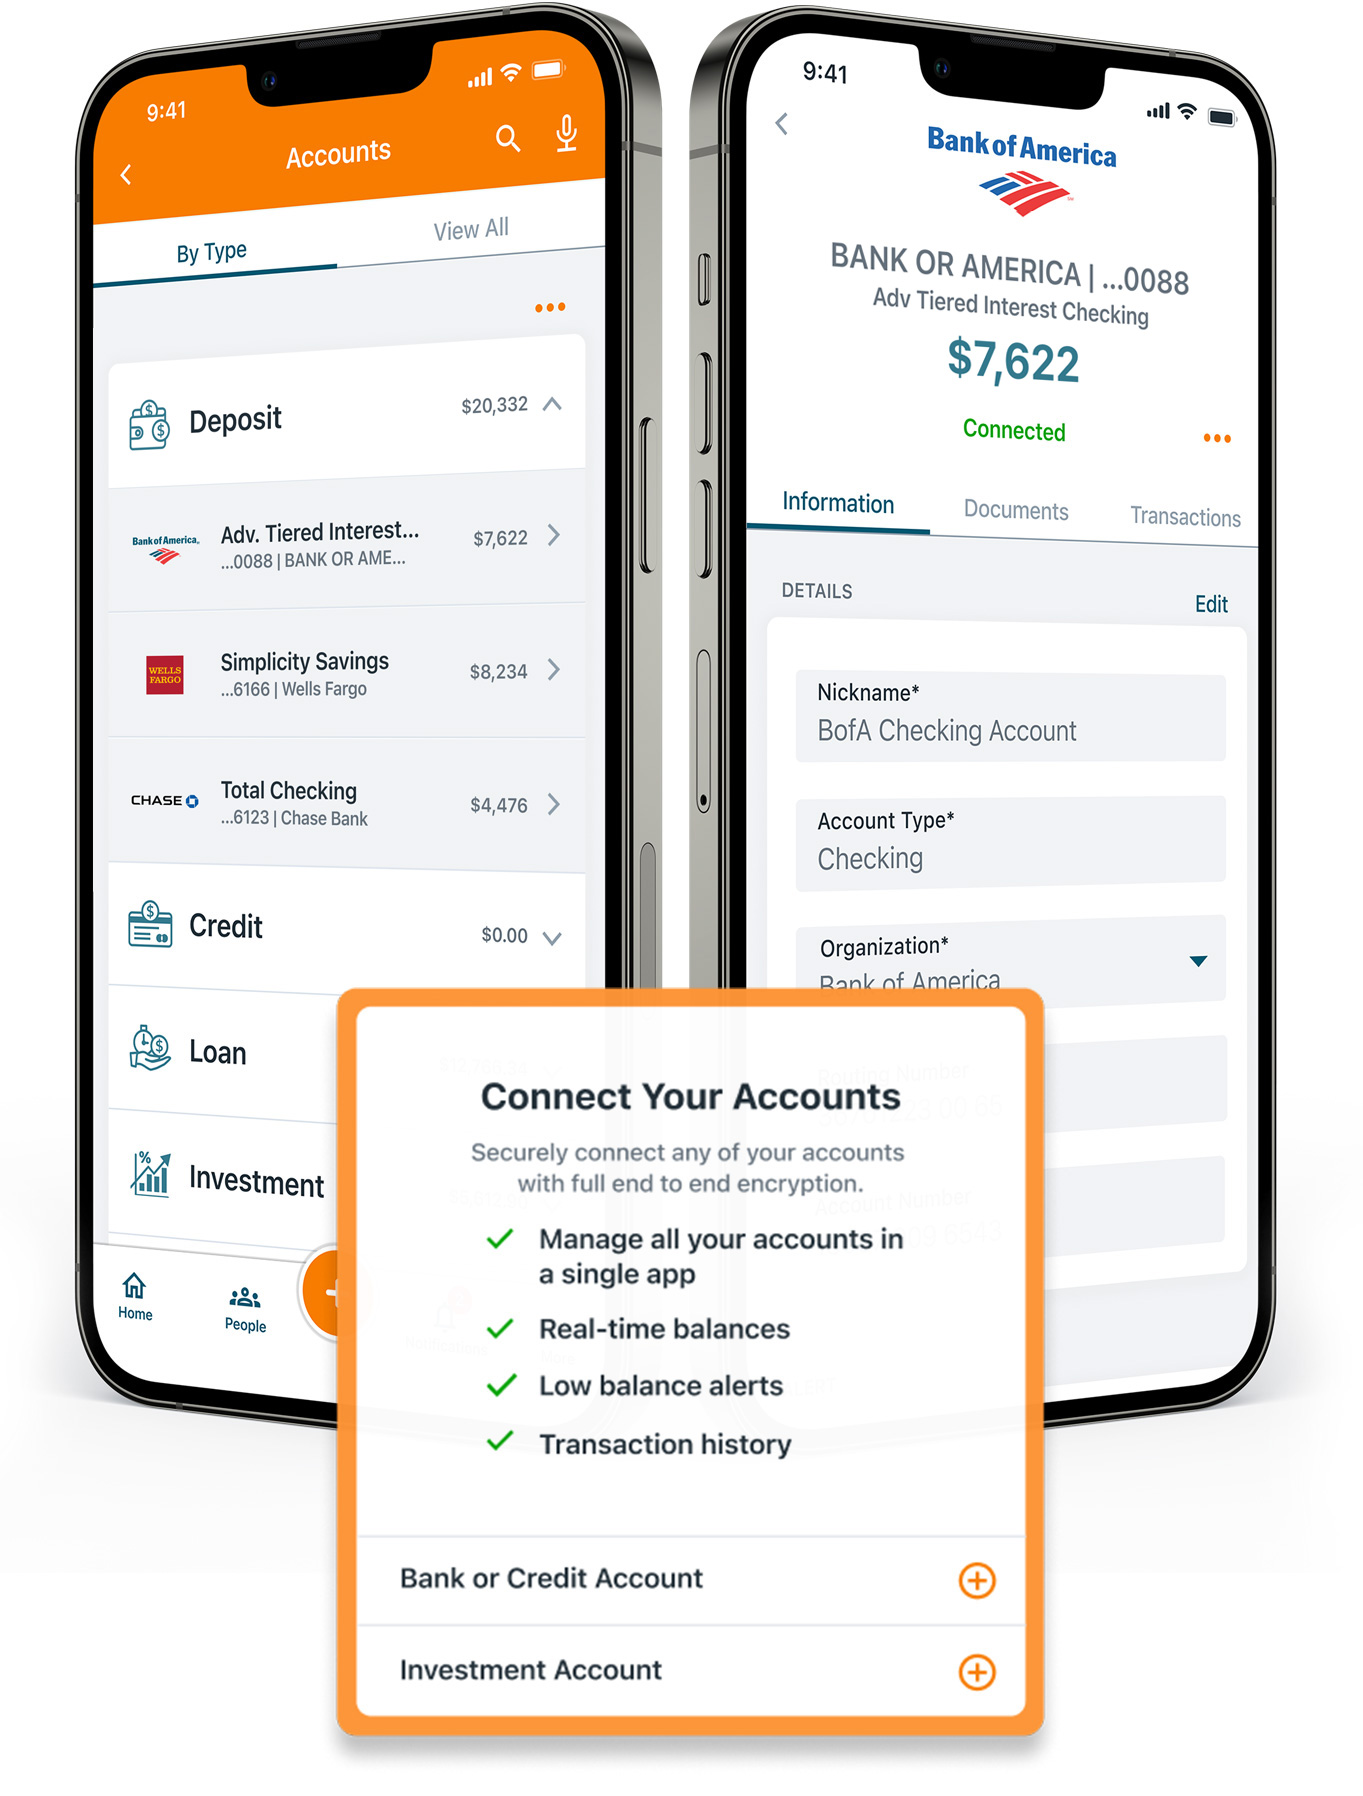 Collect'd - Connect Your Financial Accounts For Real-Time Alerts